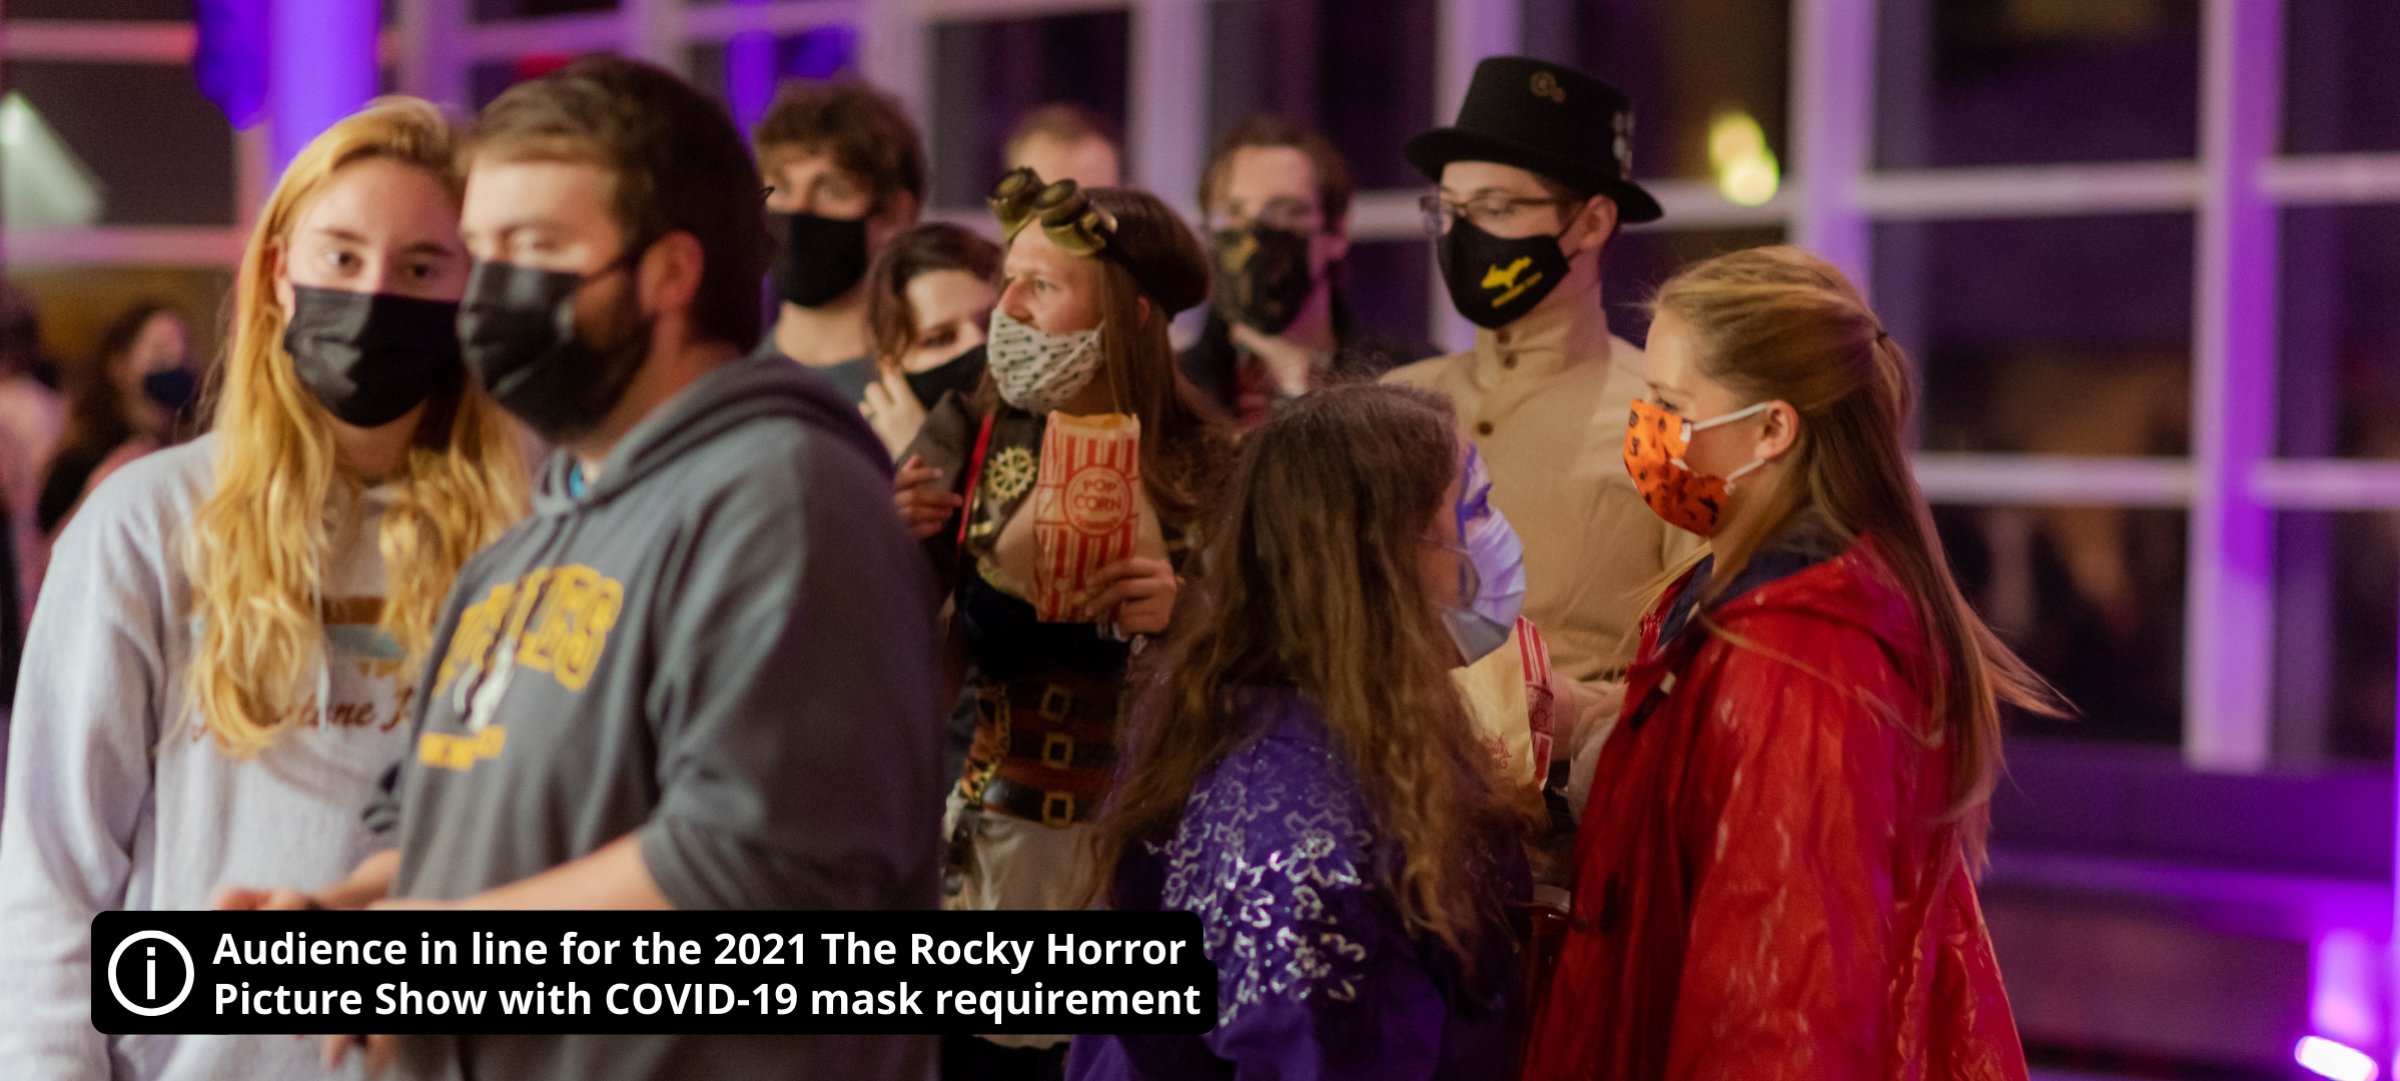 Audience in line for the 2021 The Rocky Horror Picture Show with COVID-19 mask requirement